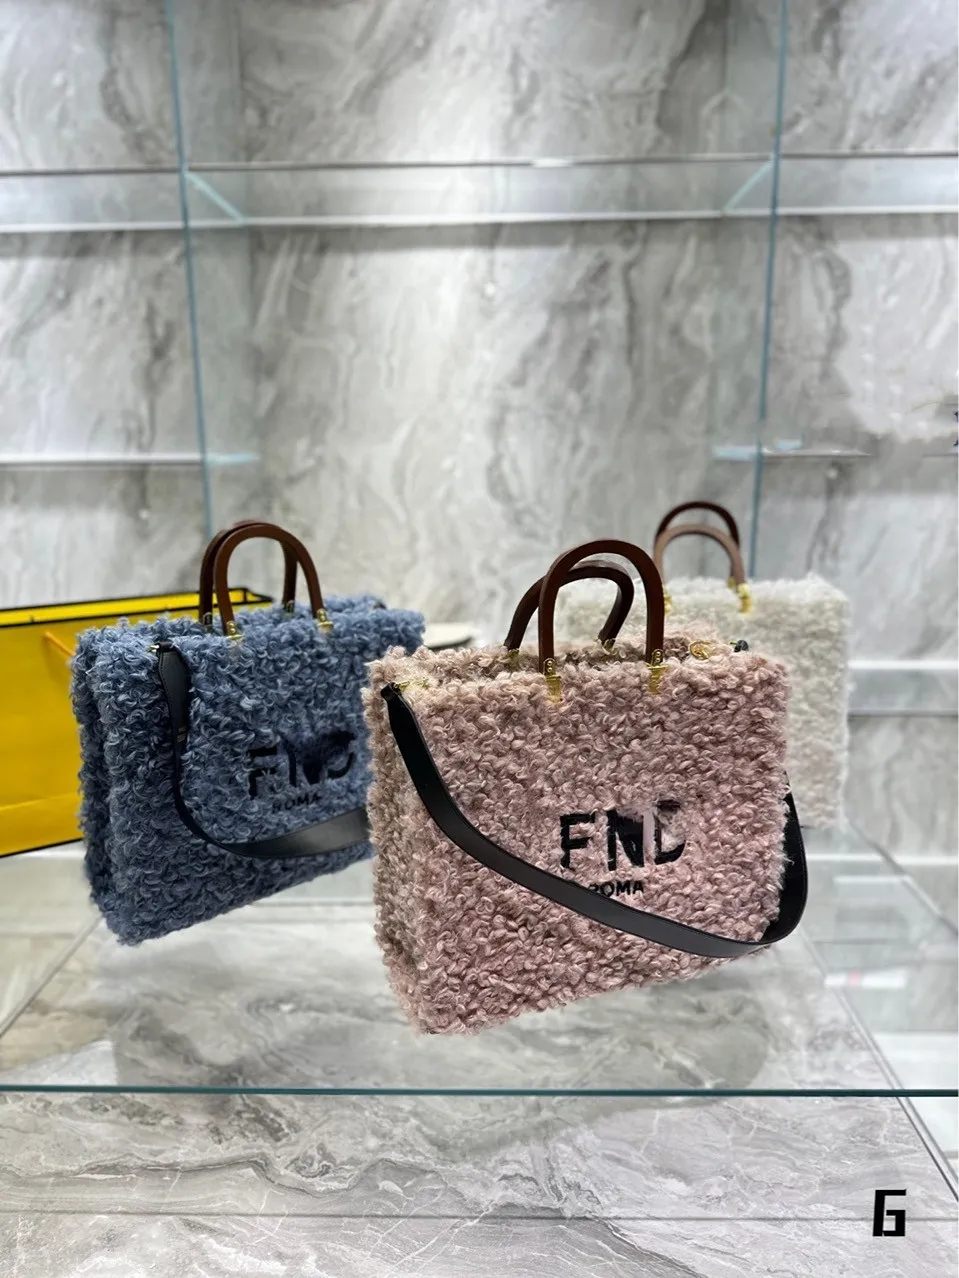 Spring and Autumn Evening Bags New Curly Tote Handle Single Shoulder Cross-body Shopping Bag Fluffy Fluffy